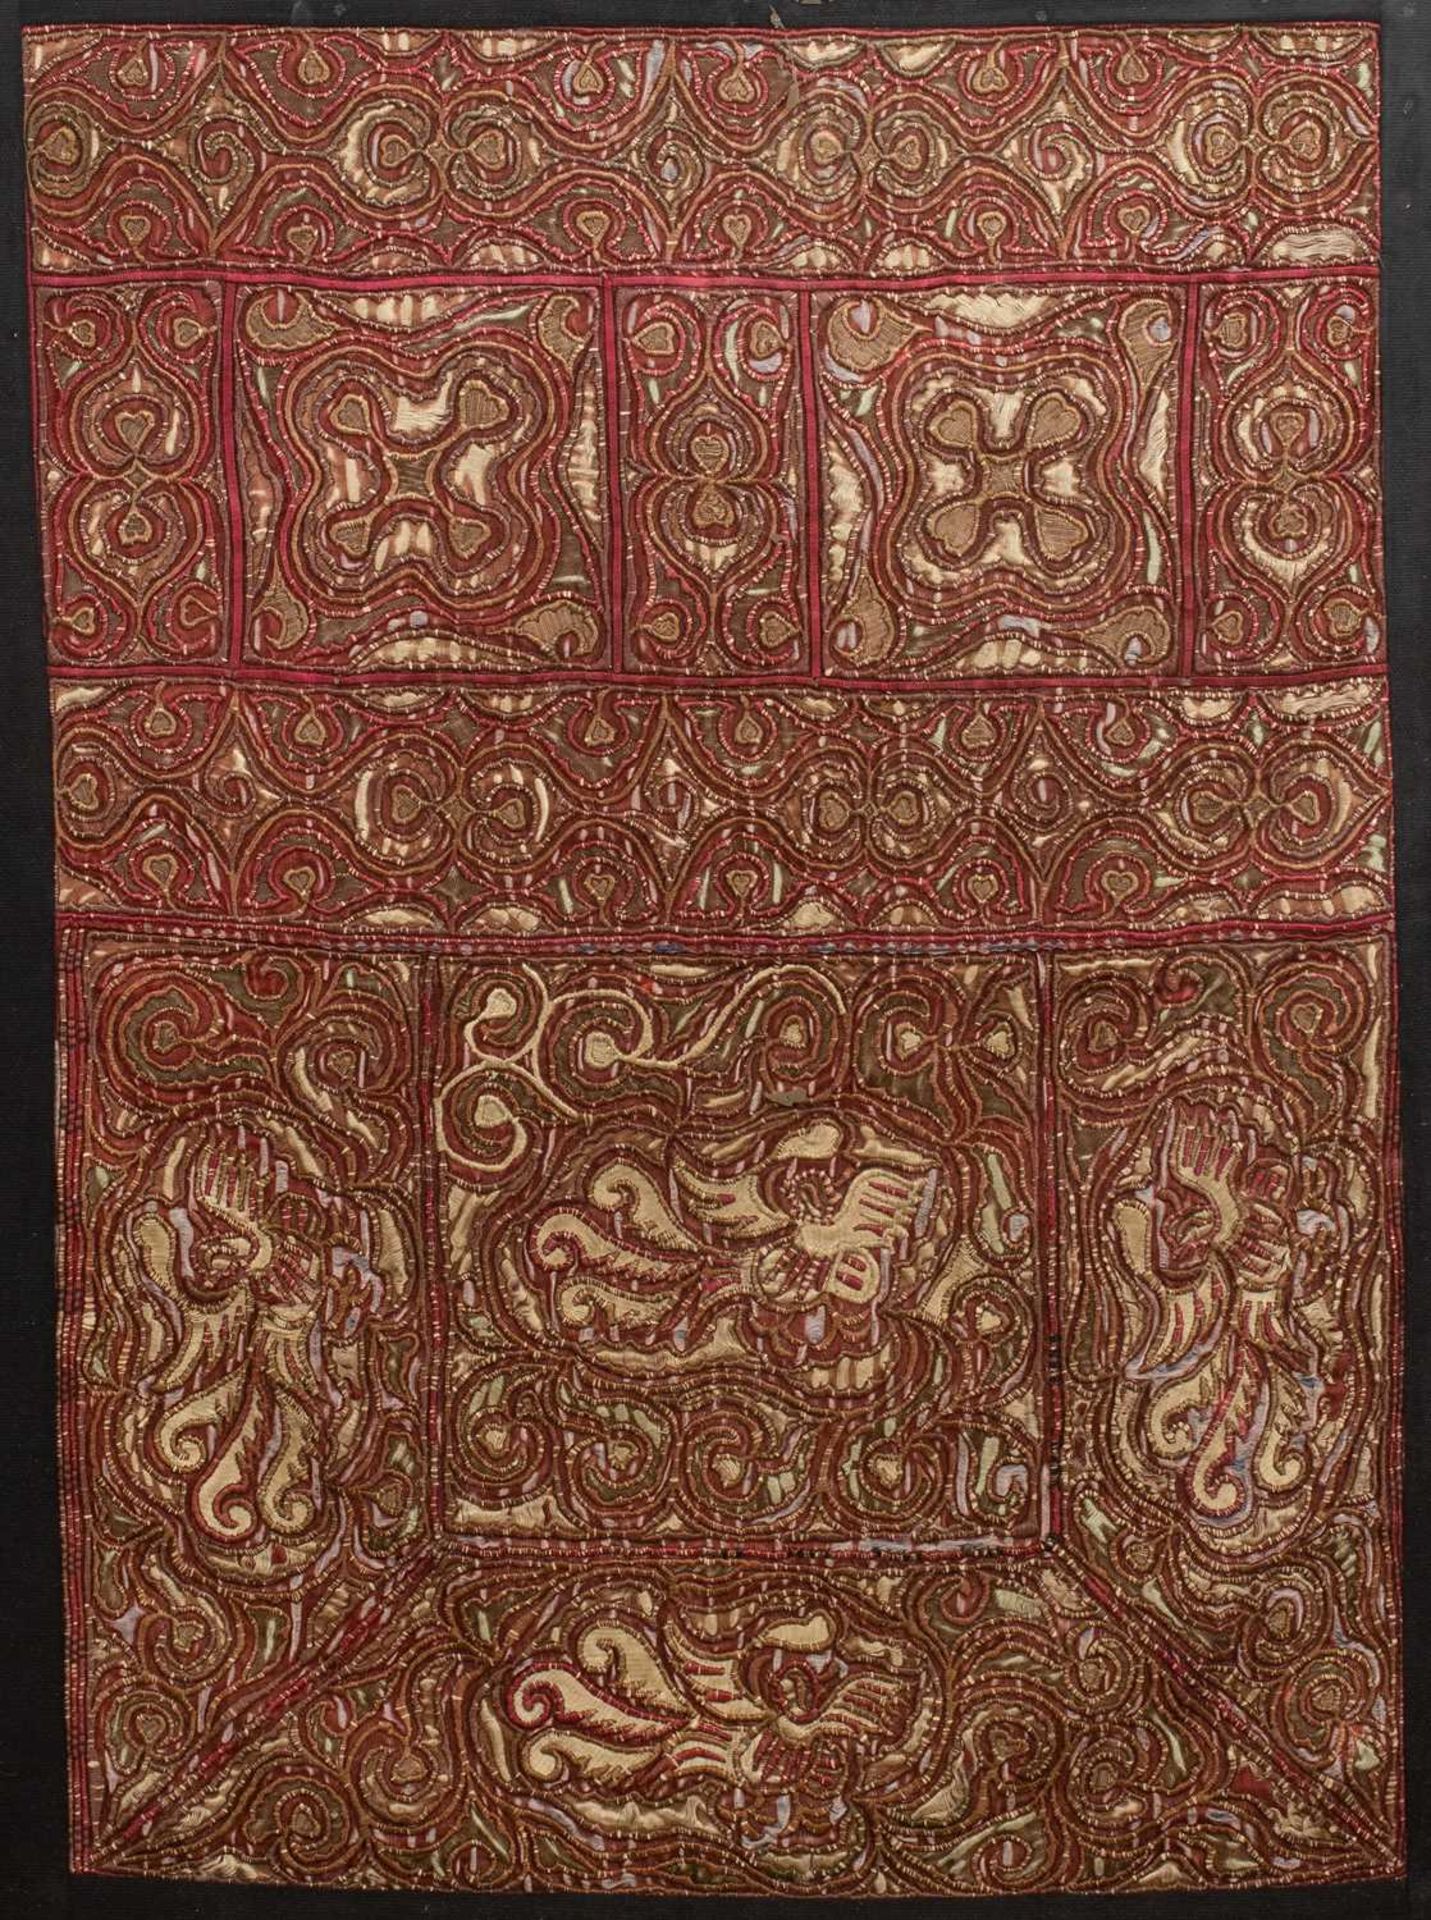 Two hill tribe red ground panels Vietnam/Cambodia with embroidered circular and other abstract - Image 4 of 6